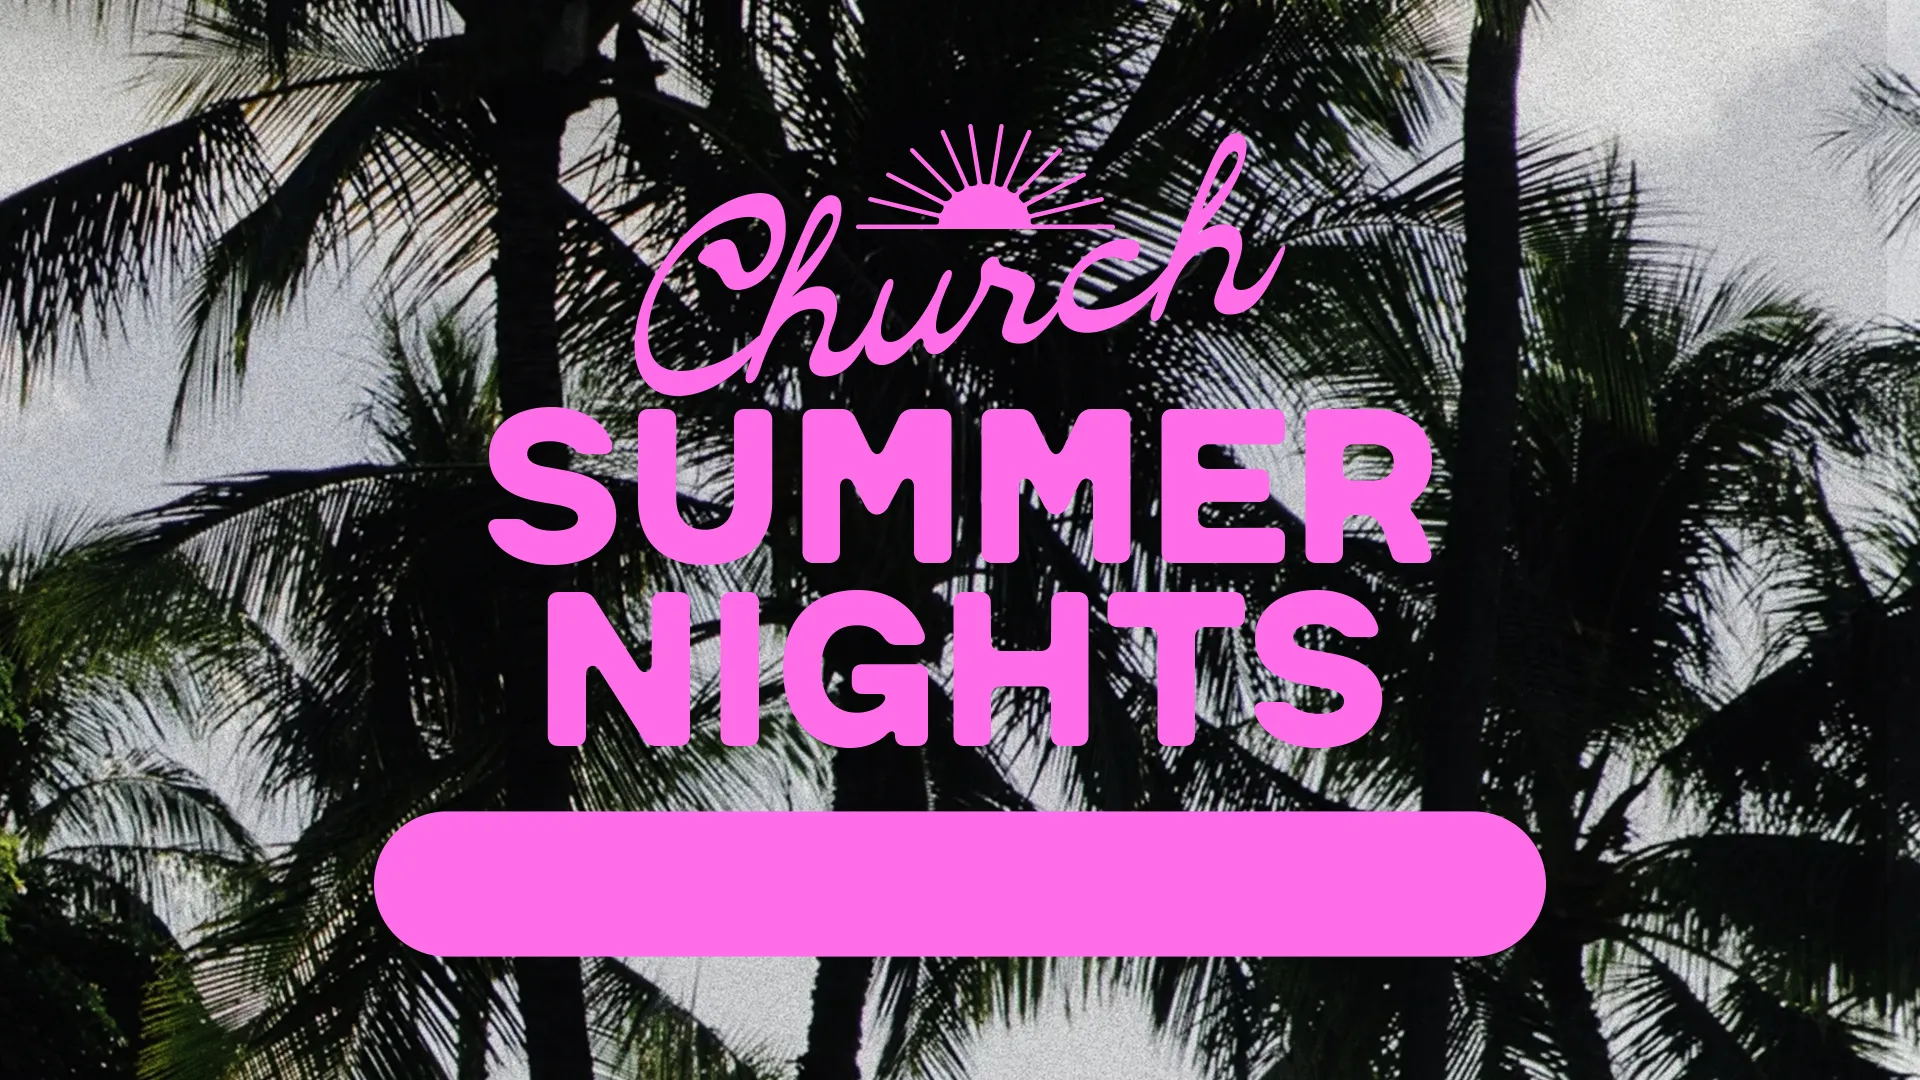 Create an inviting atmosphere for your evening events with this "Church Summer Nights" graphic. Featuring a tropical palm tree background and bold pink text, it perfectly sets the mood for warm summer nights filled with fellowship and fun.